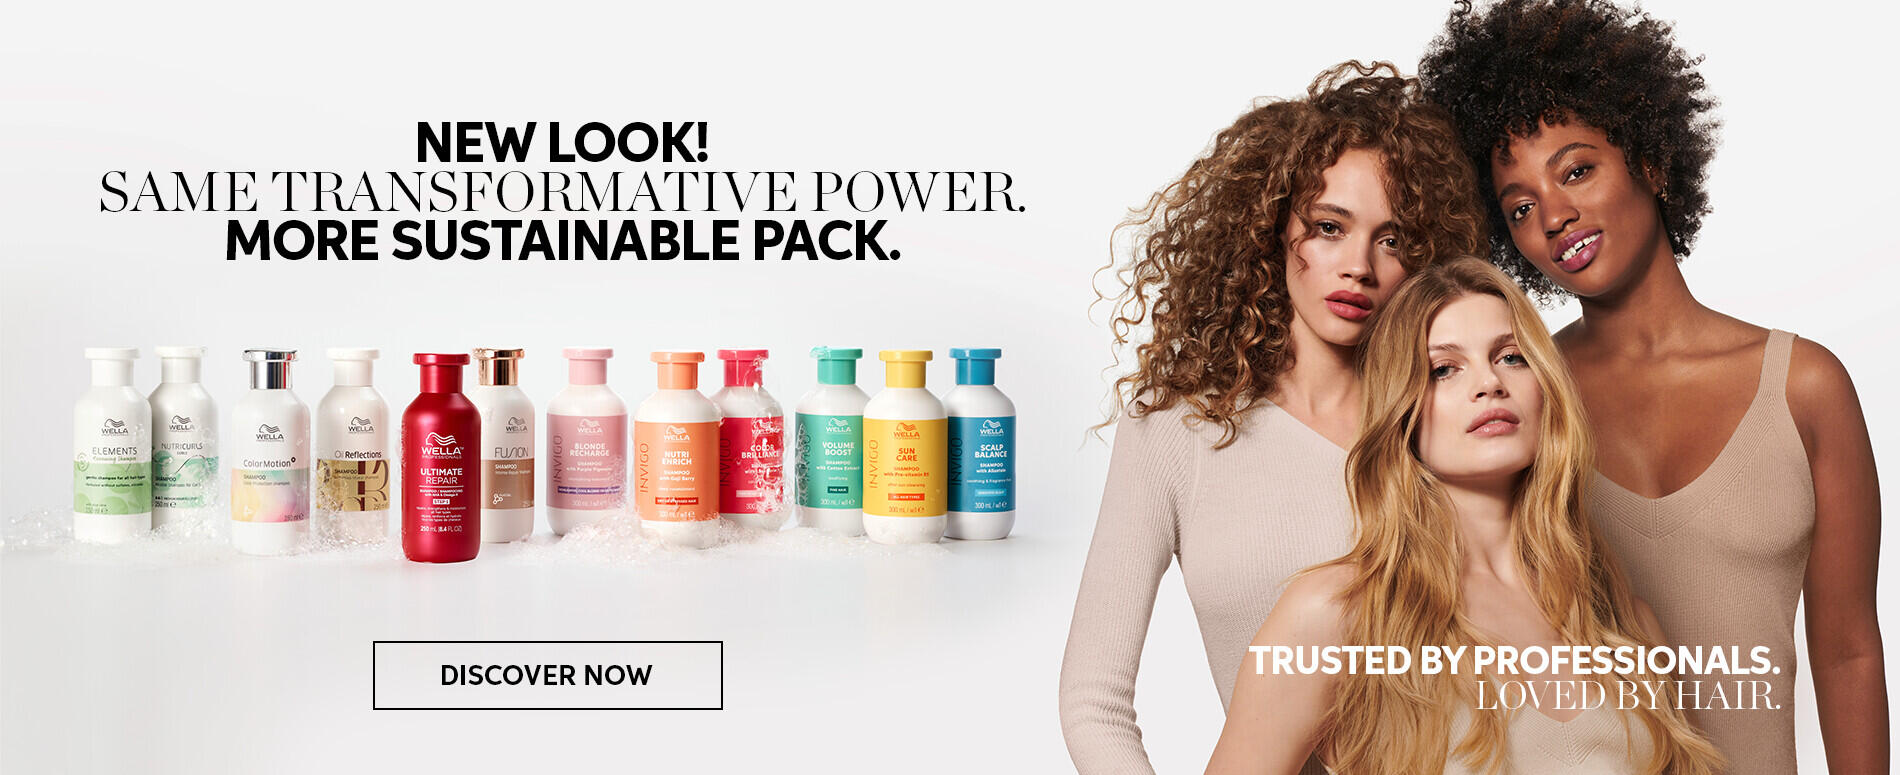 Line up of the full Wella Professionals haircare line alongside three models with different hair types